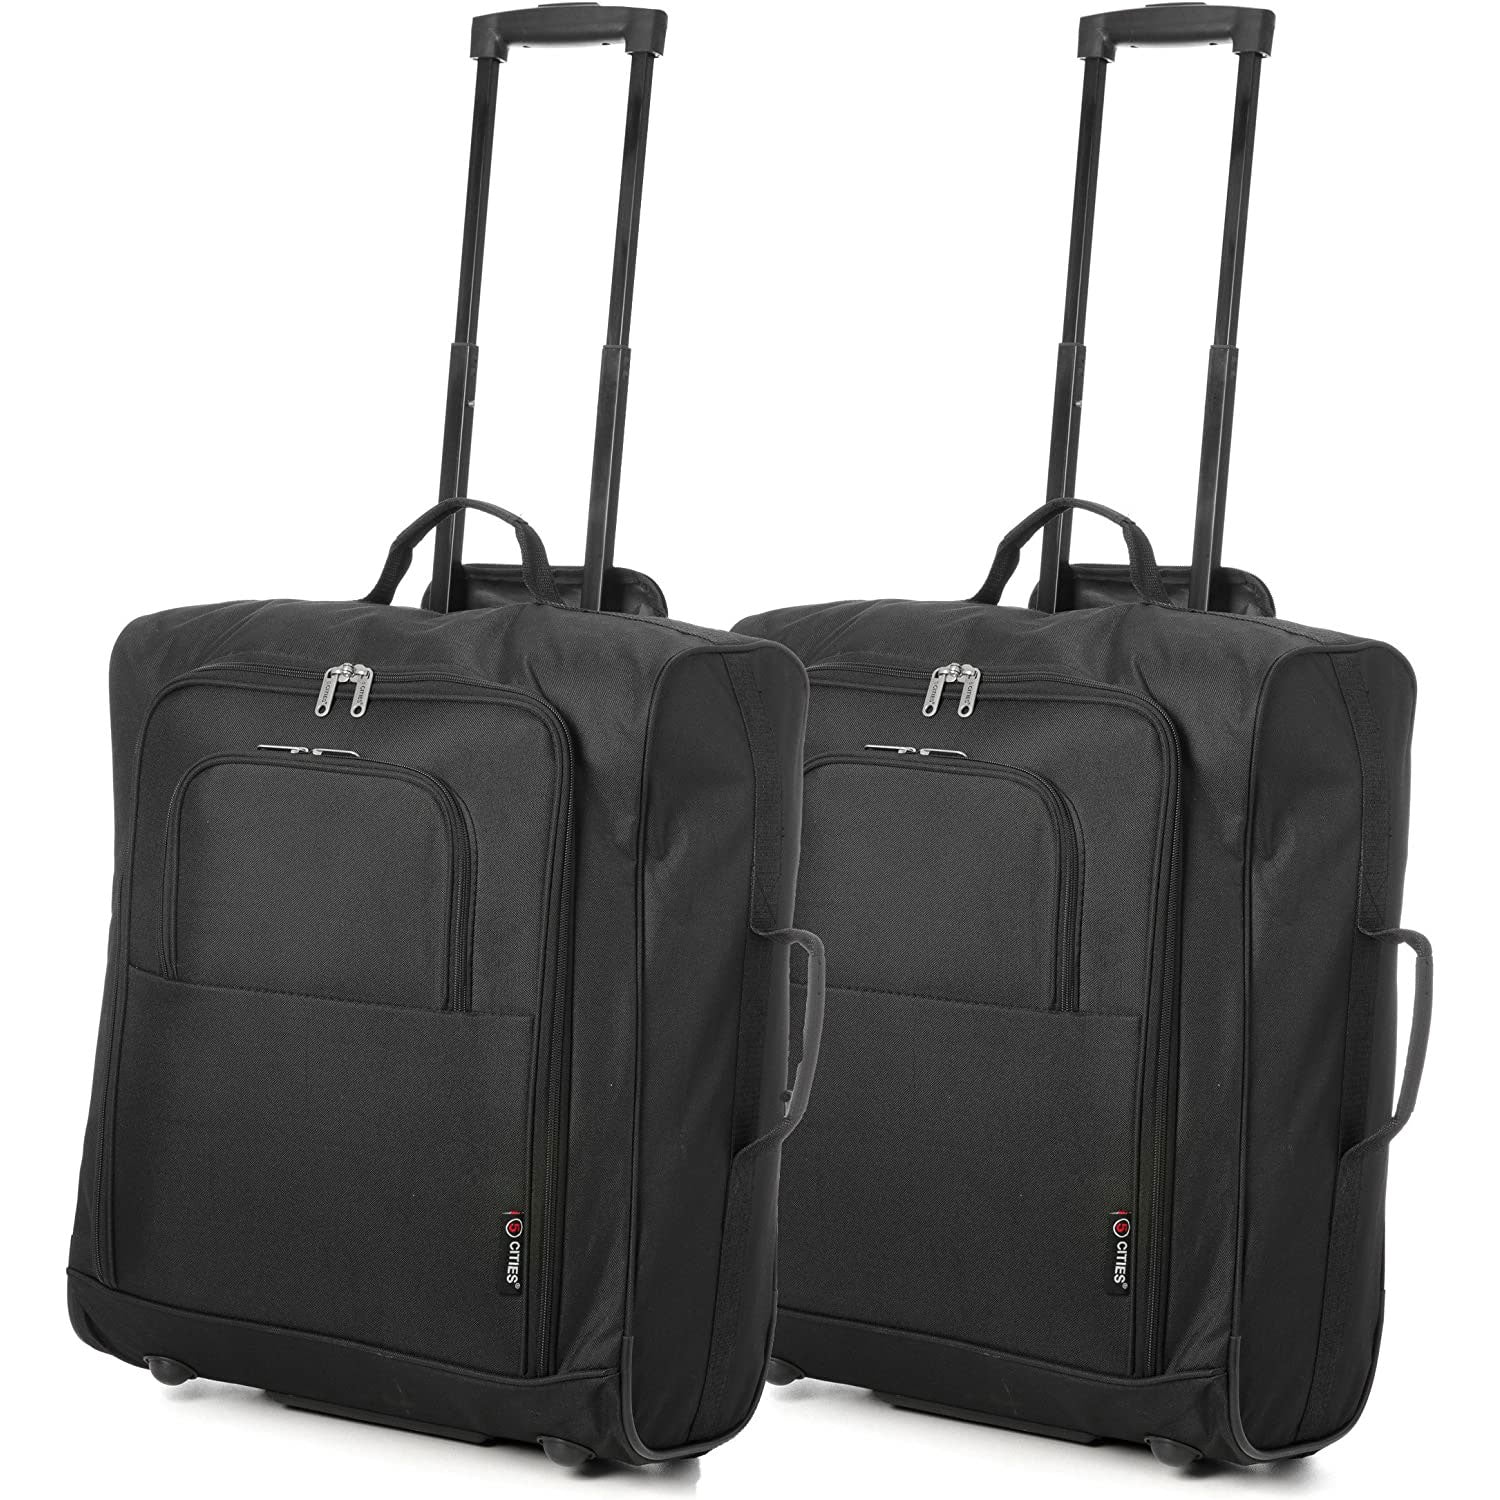 5 CITIES easyJet Maximum Size (45x36x20cm) New and Improved 2024 Cabin –  Travel Luggage & Cabin Bags